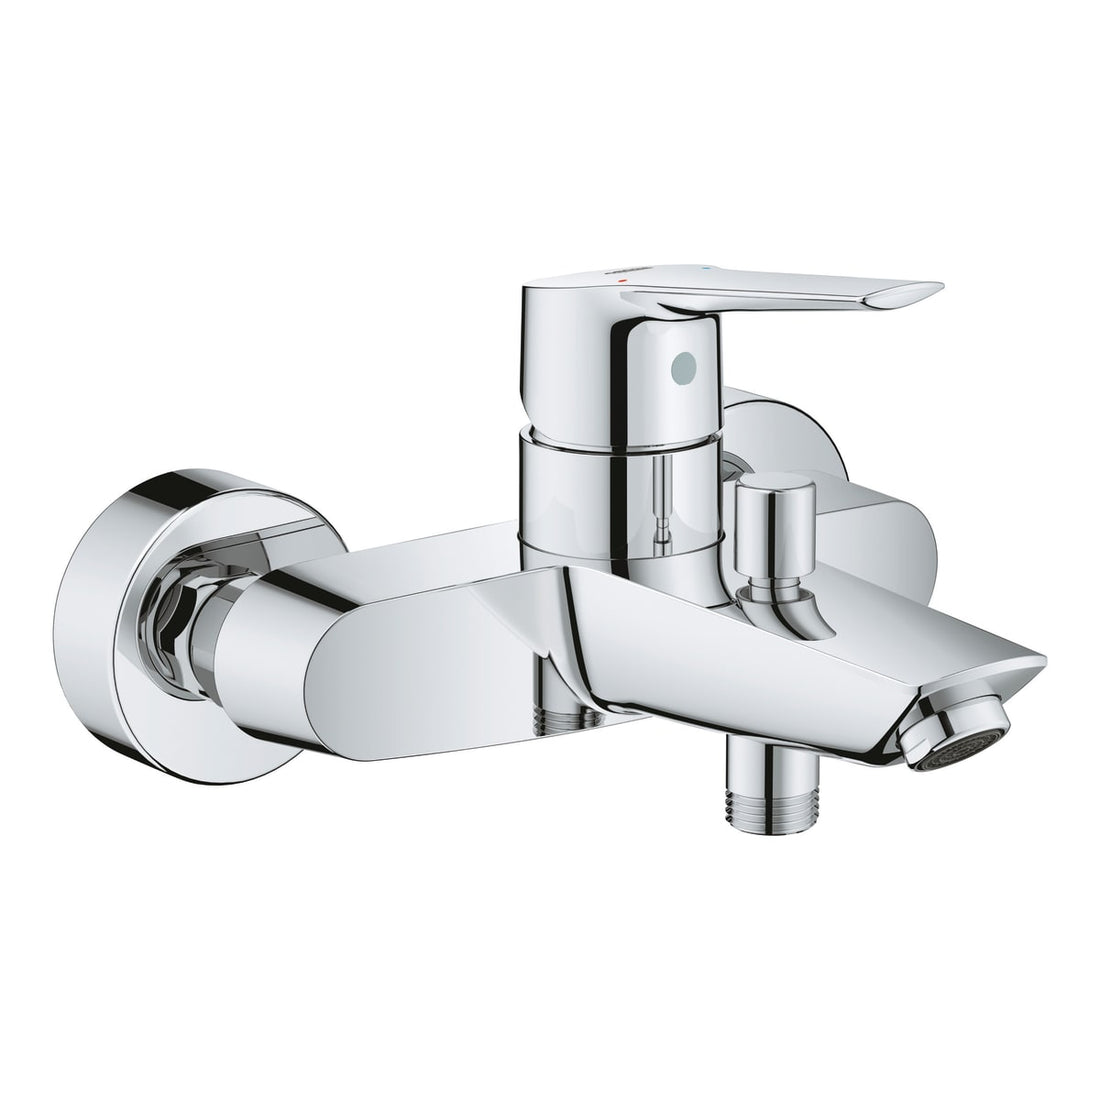 START 2021 BATHTUB MIXER WITHOUT CHROME FITTINGS - best price from Maltashopper.com BR430007194